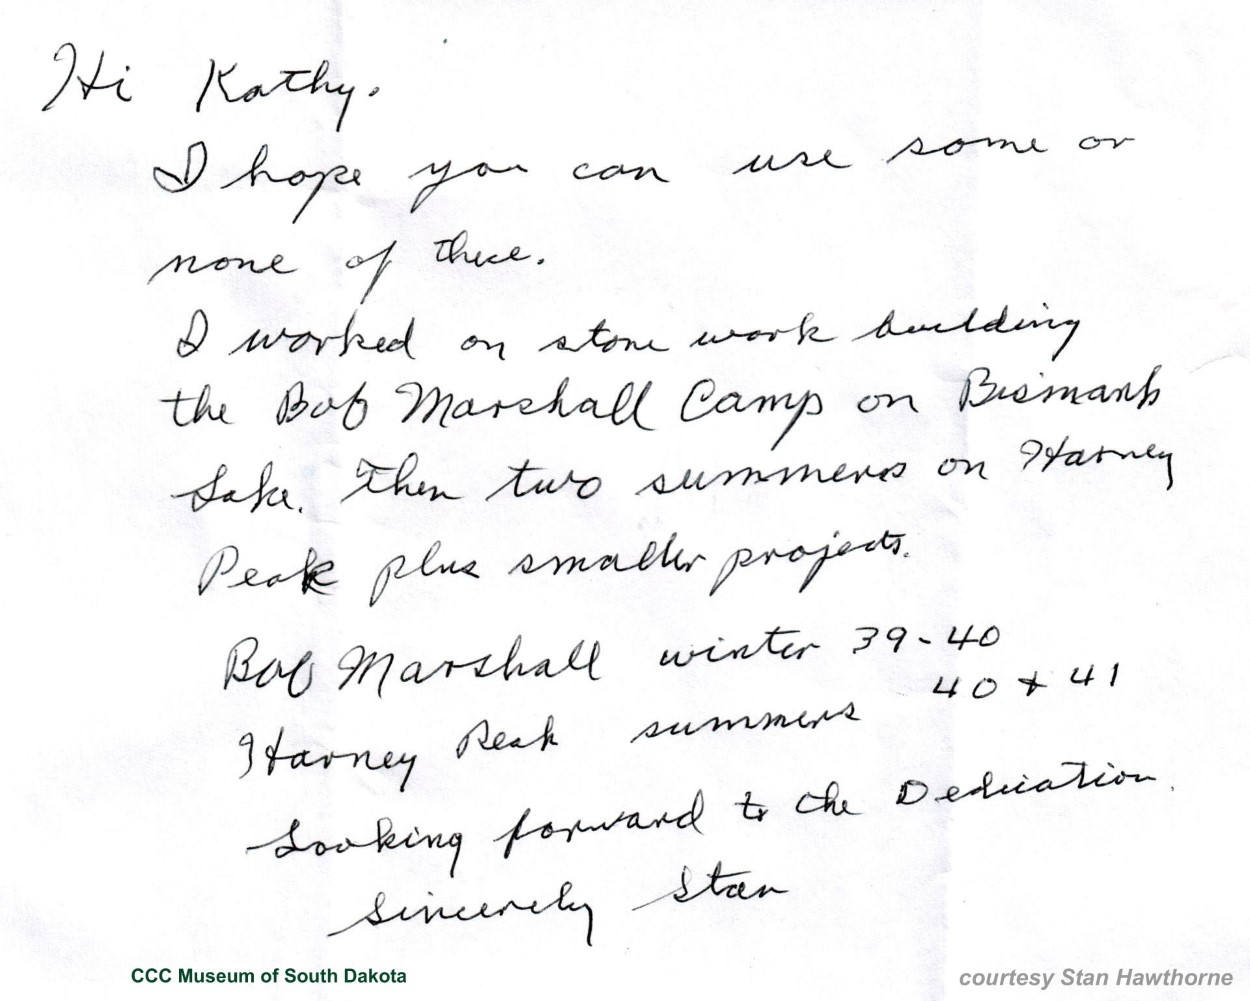 letter from Stan Hawthorne to Kathy